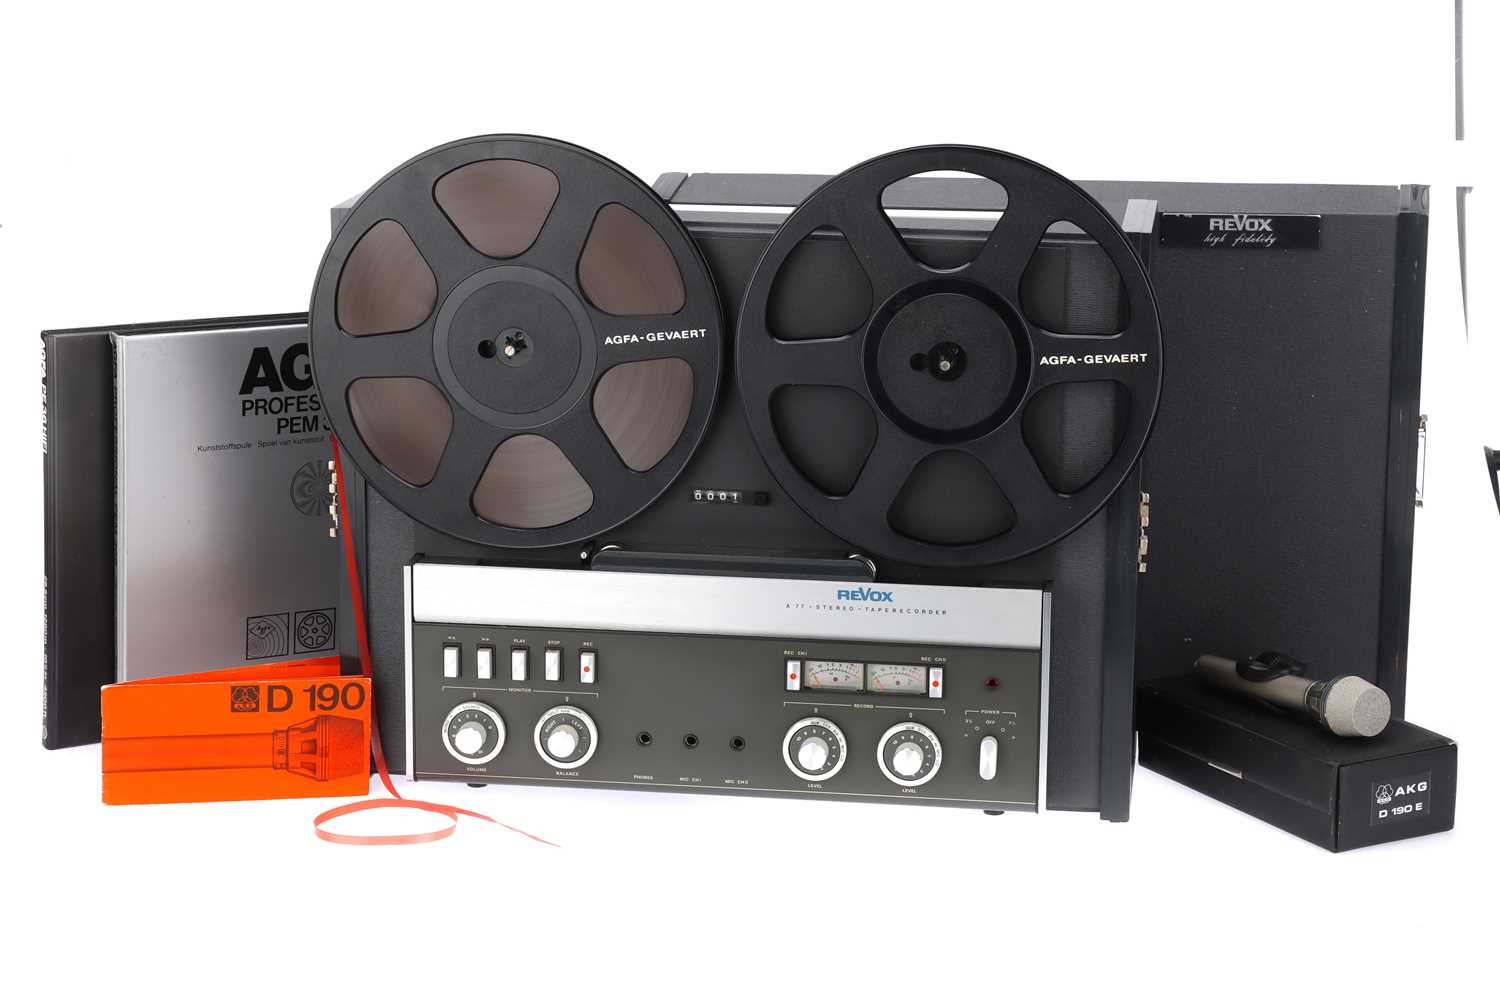 Sold at Auction: REVOX A77 REEL TO REEL RECORDER